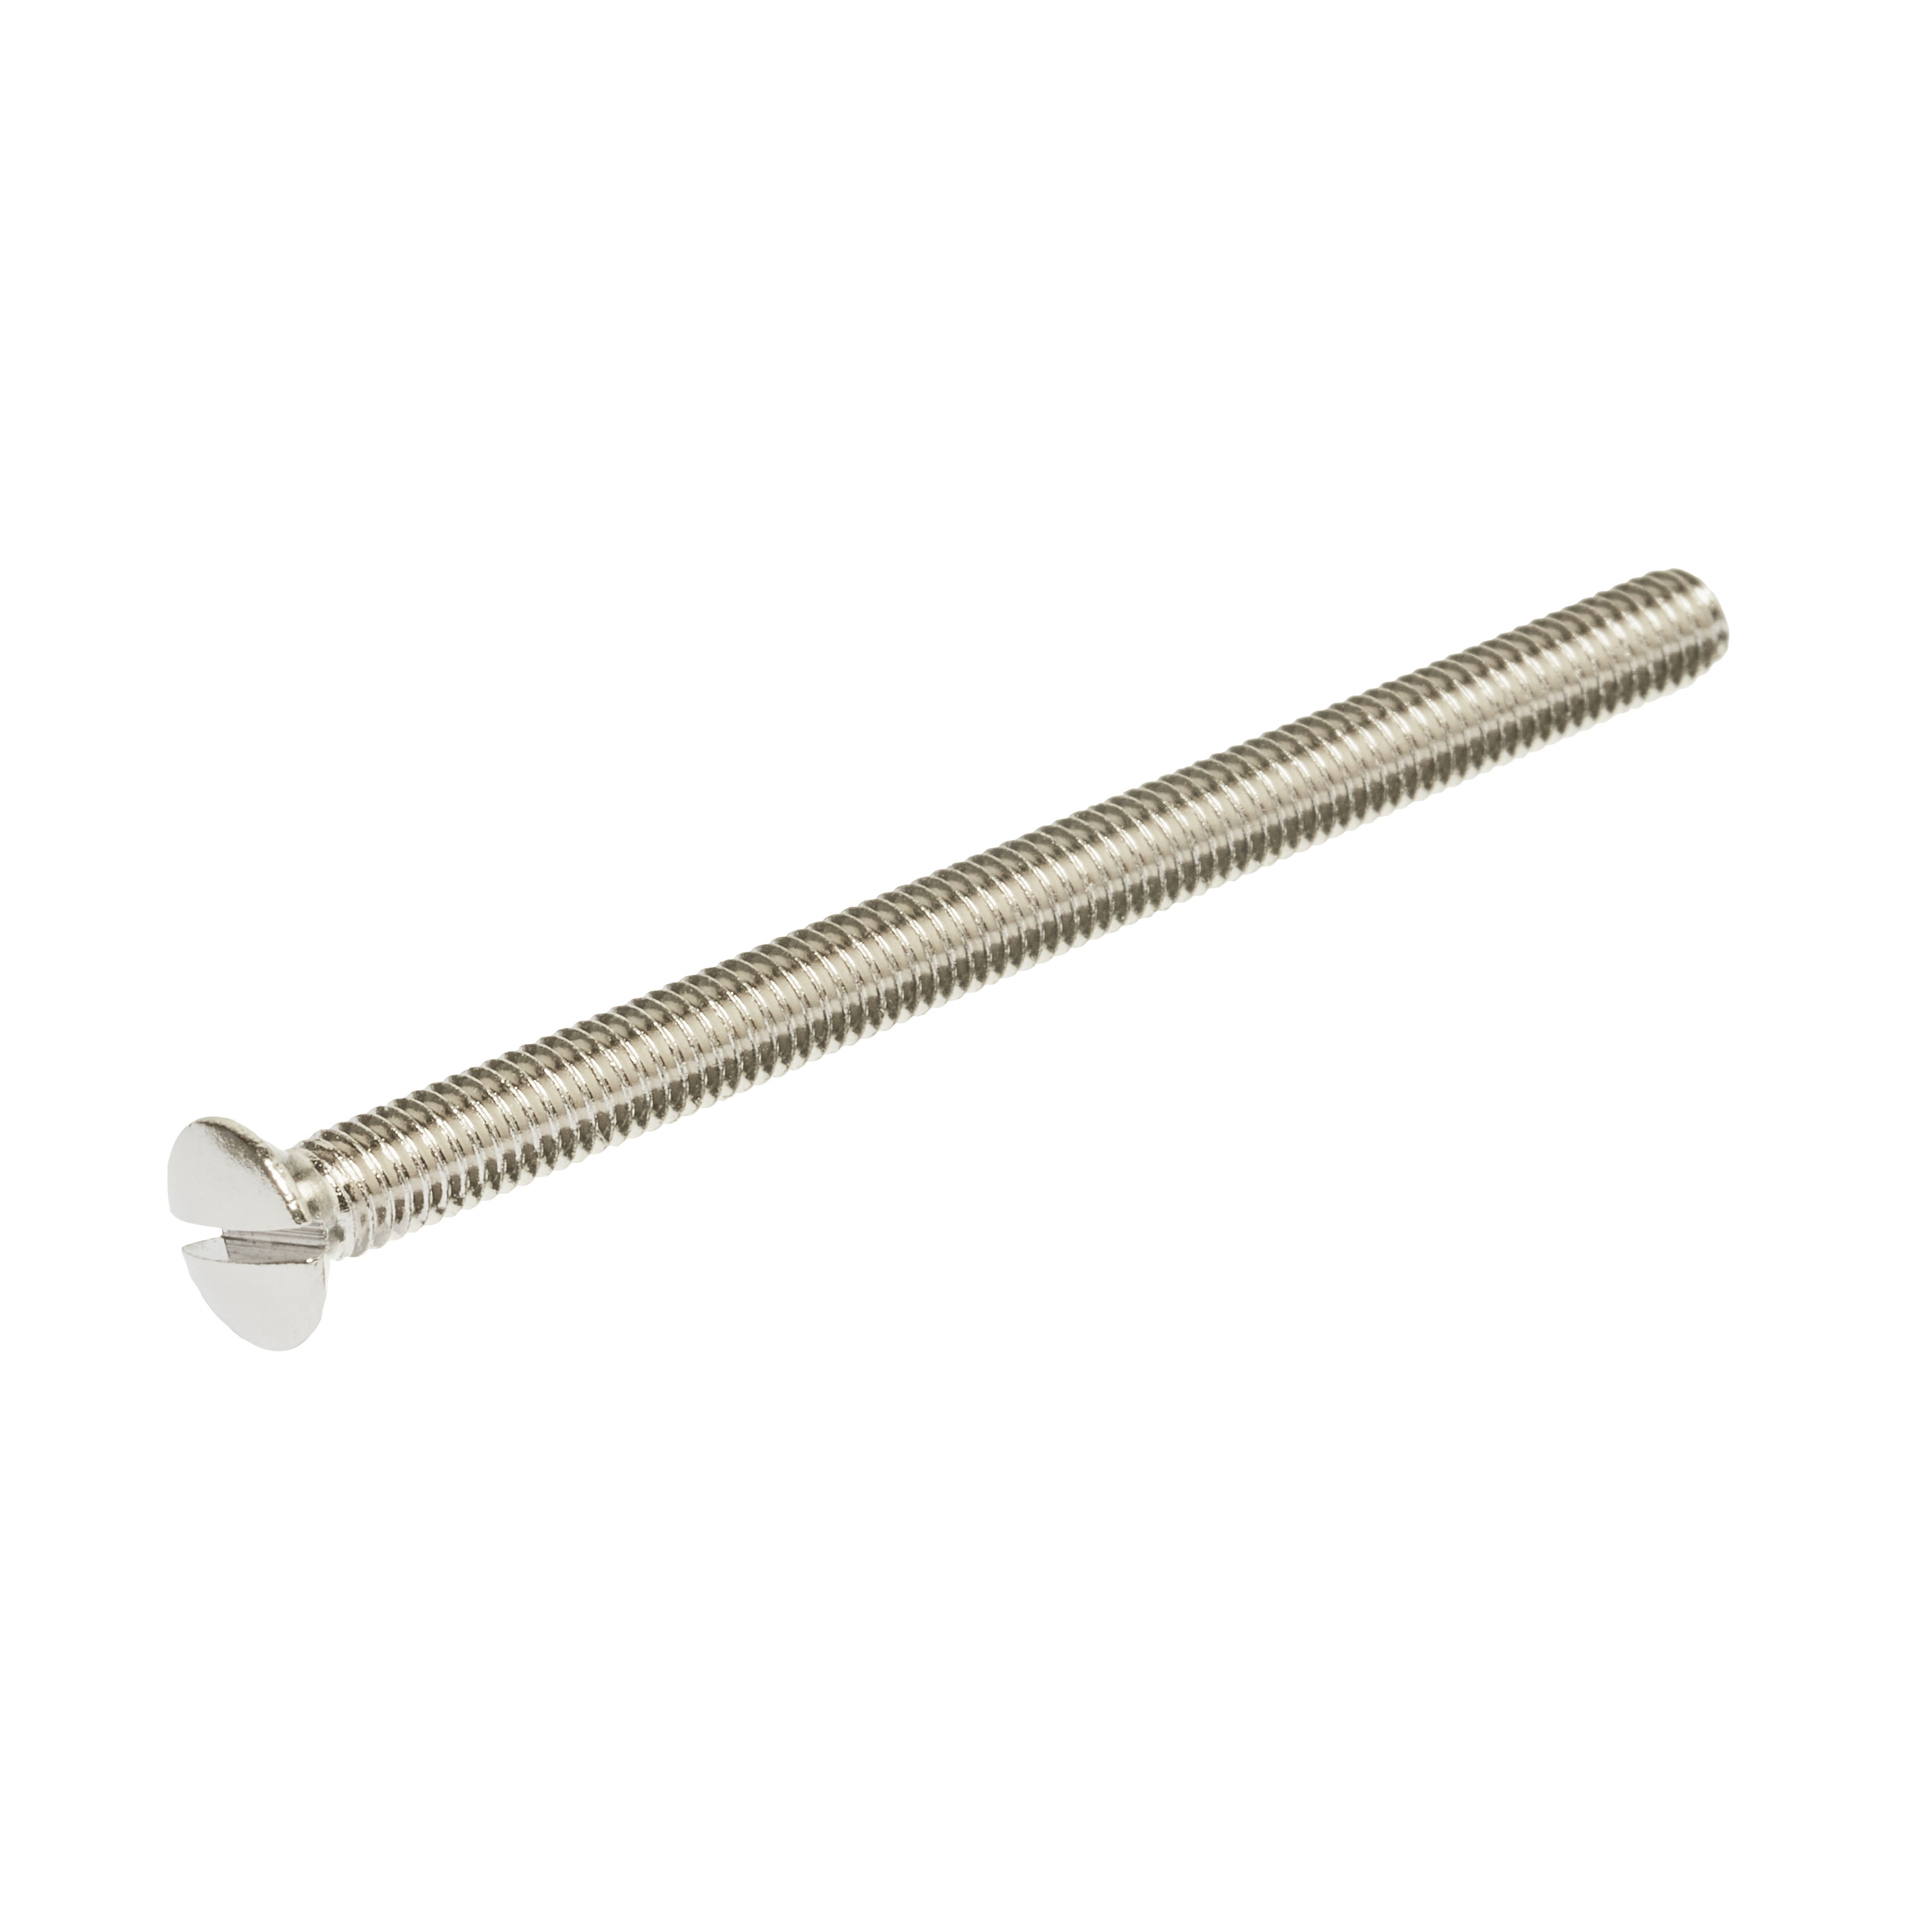 Easydrive Slotted Nickel-plated Brass Electrical Screw (Dia)3.5mm (L)50mm, Pack of 50